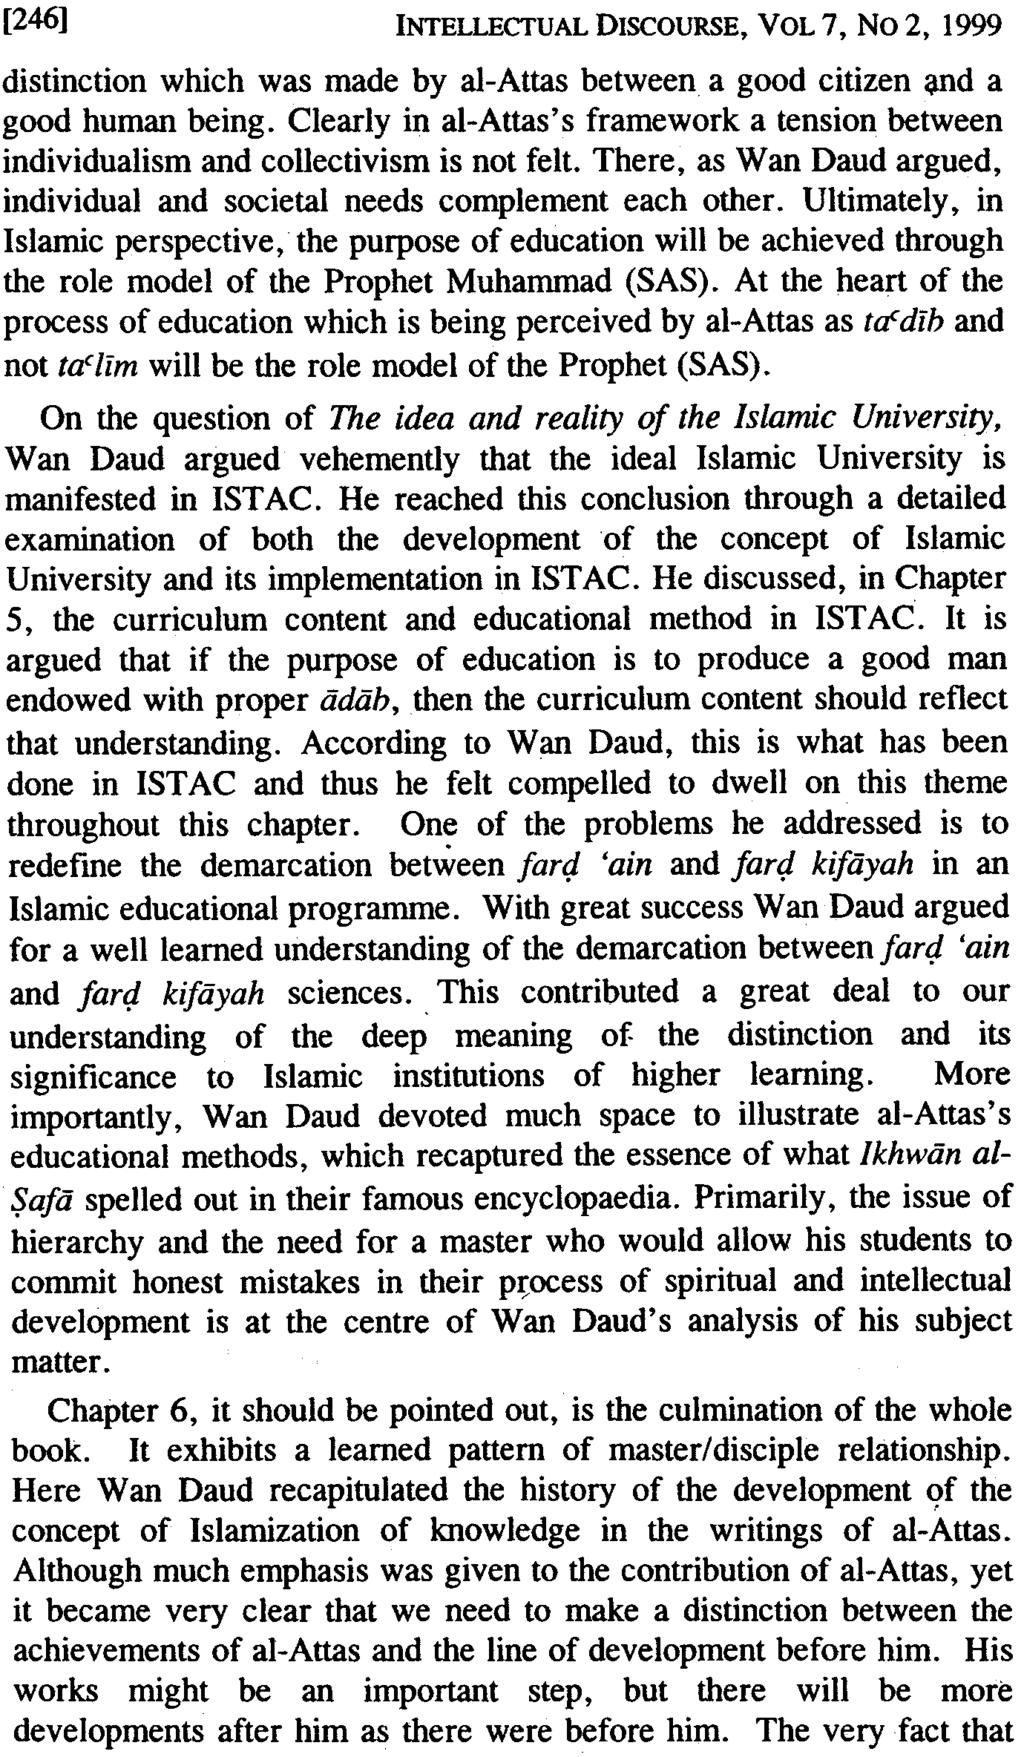 [246] INTELLECTUAL DISCOURSE, VOL 7, No2, 1999 distinction which was made by al-attas between a good citizen ~d a good human being.